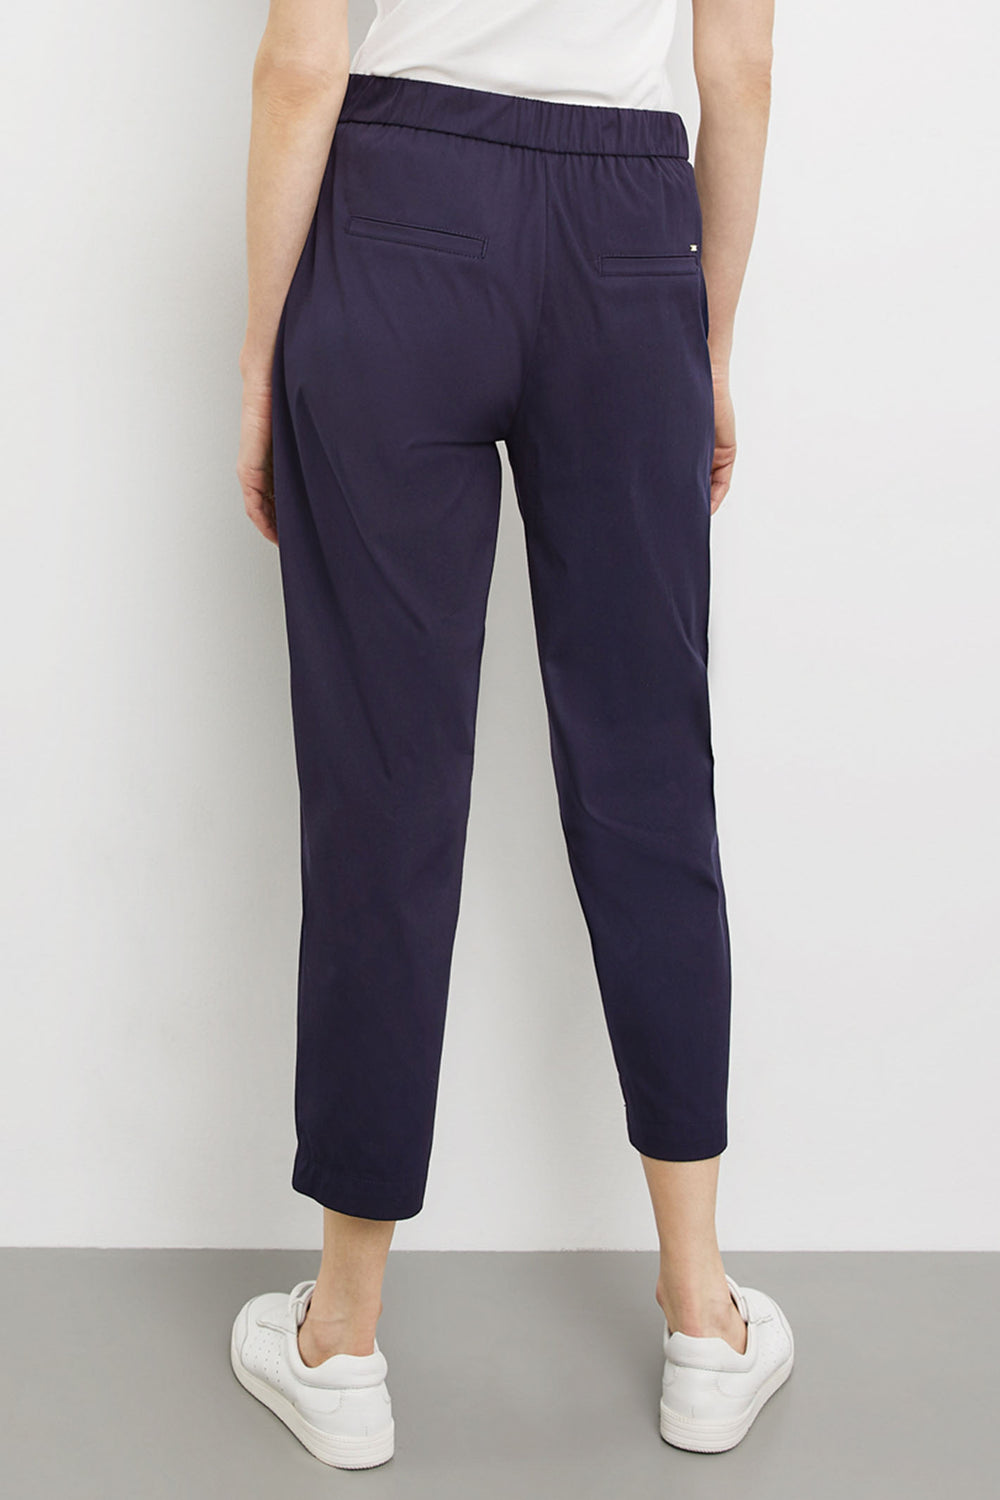 Gerry Weber 222069-66235 80890 Navy Pull-On Trousers - Experience Boutique